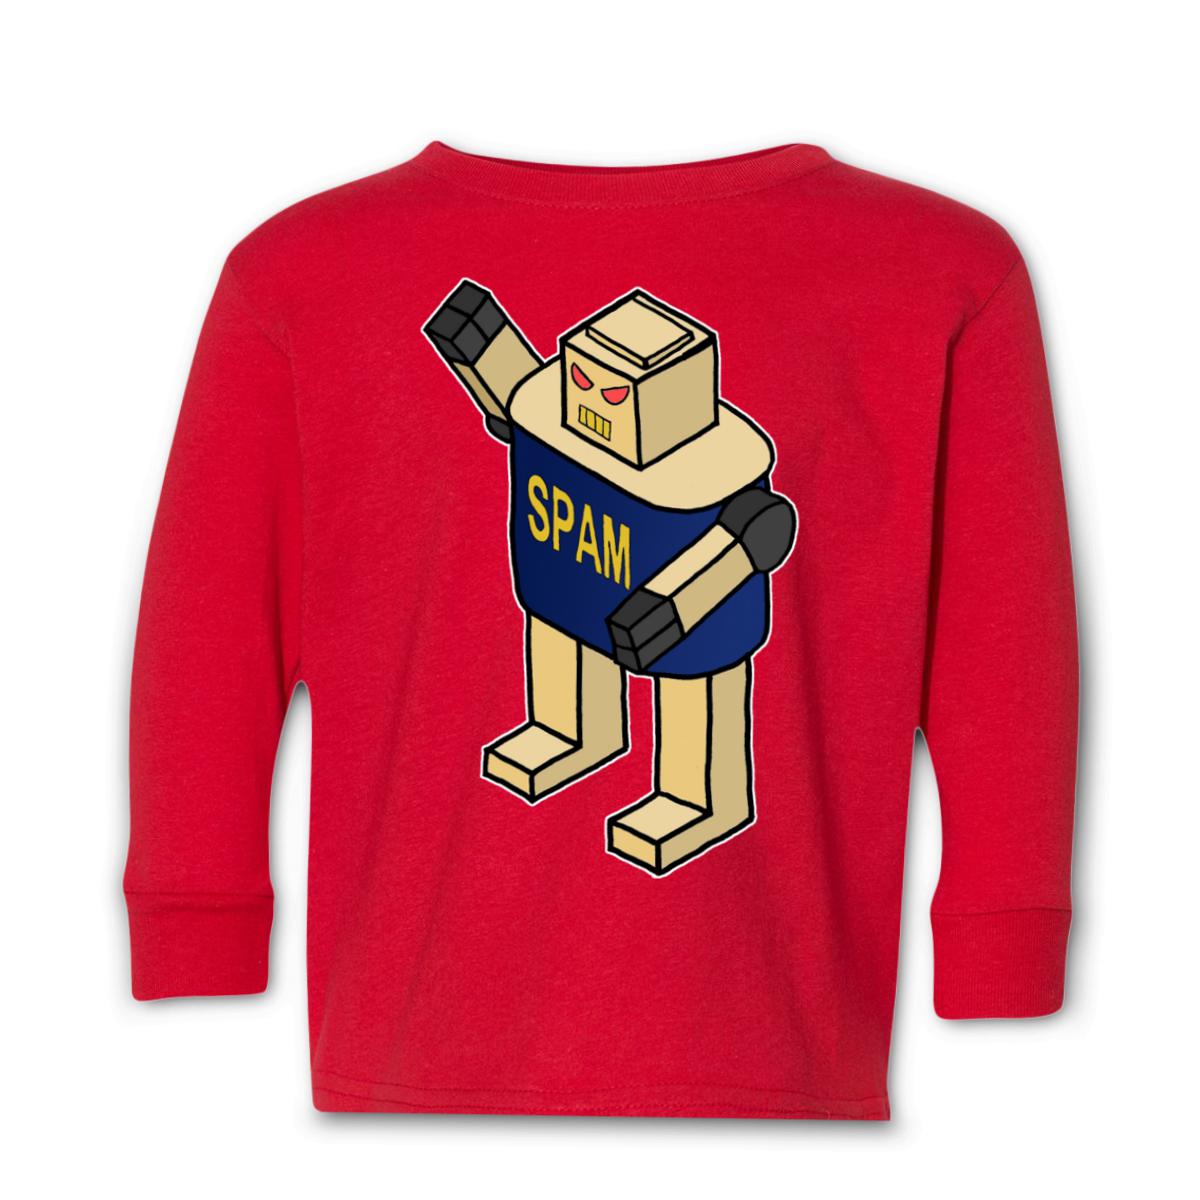 Spam Bot Toddler Long Sleeve Tee 2T red